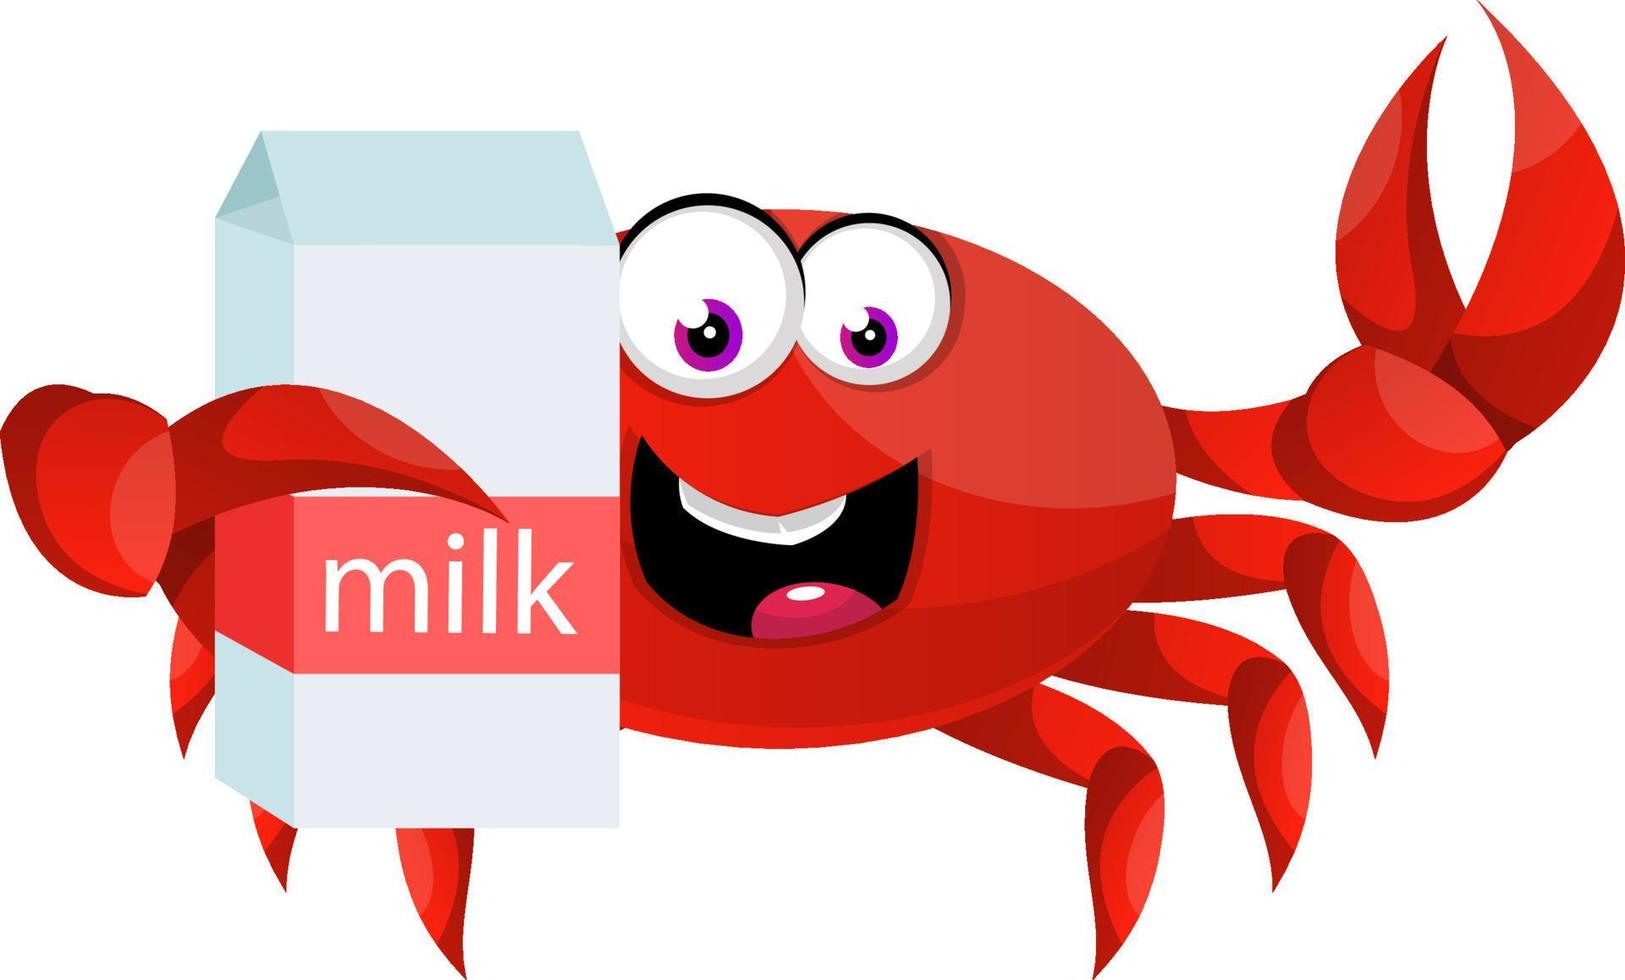 Crab with milk, illustration, vector on white background.